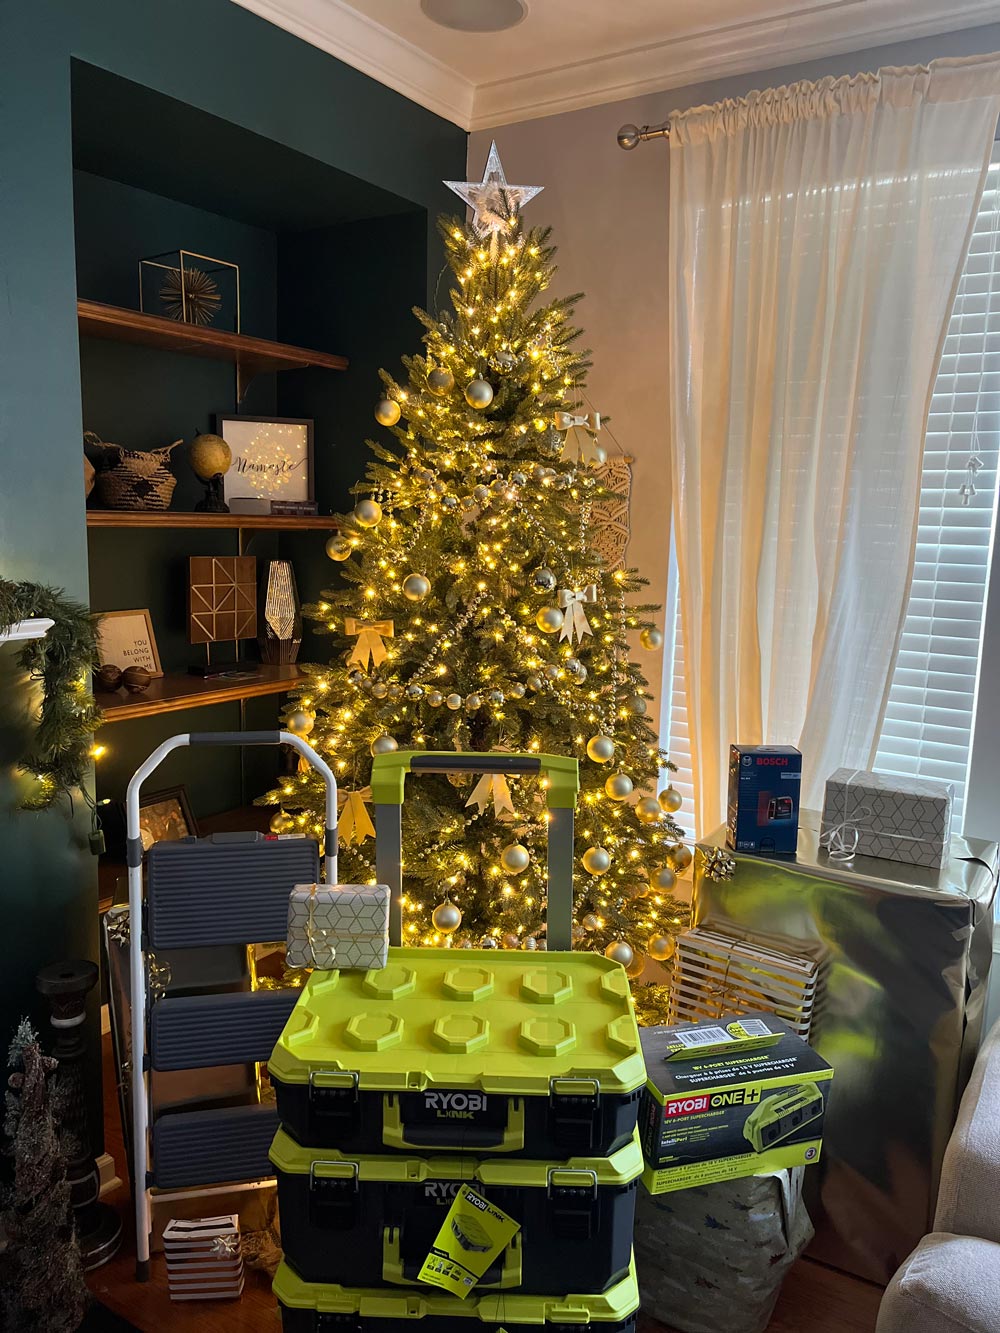 Lit Christmas tree with Ryobi storage unit, ladder, and additional products.